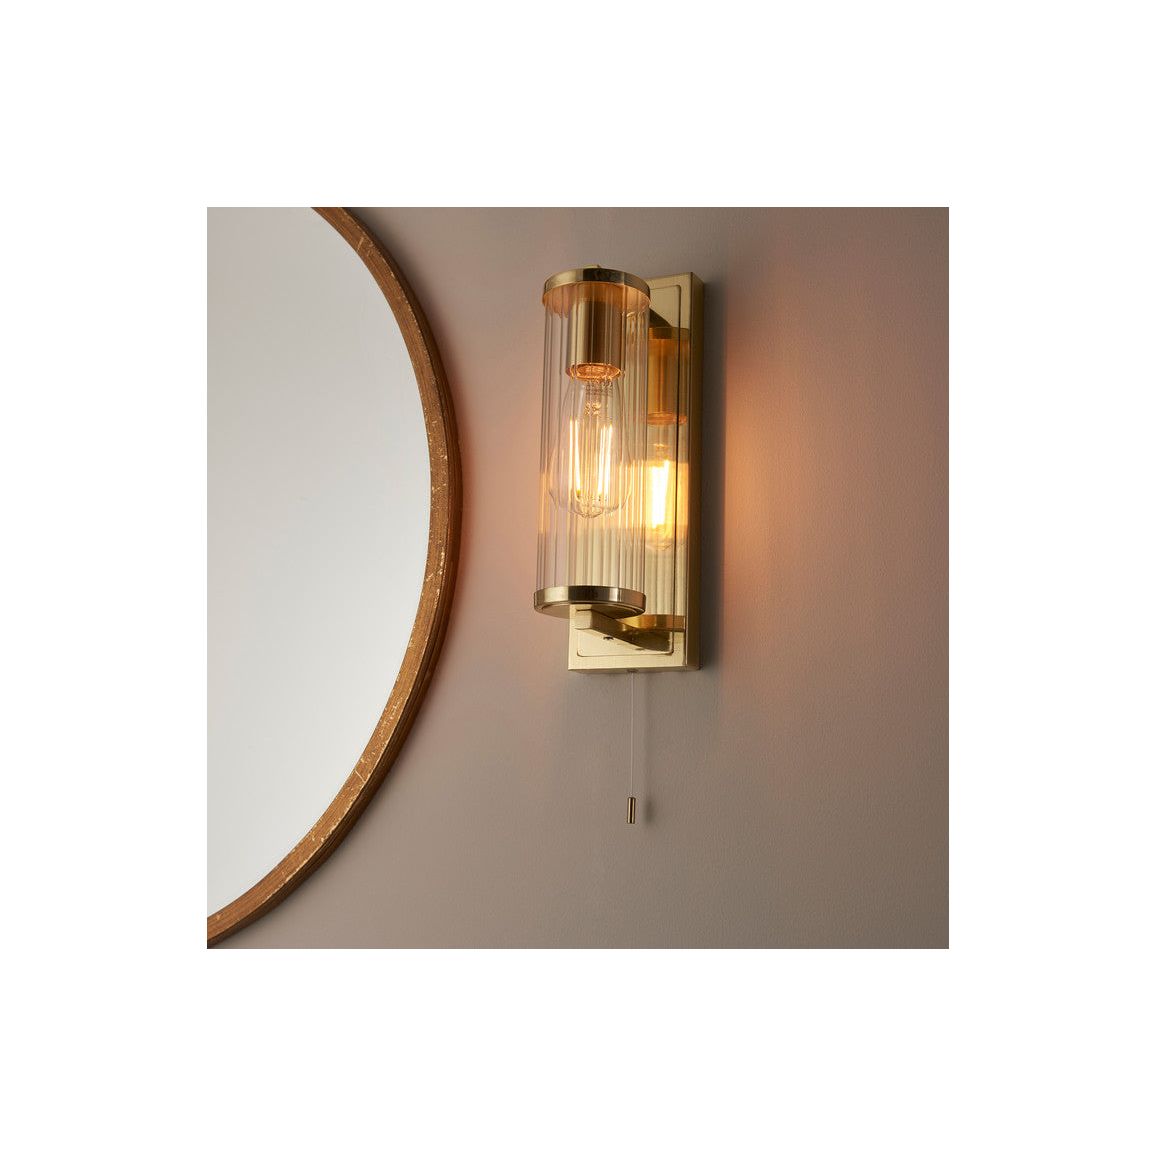 Lawrence Wall Light - Brushed Brass